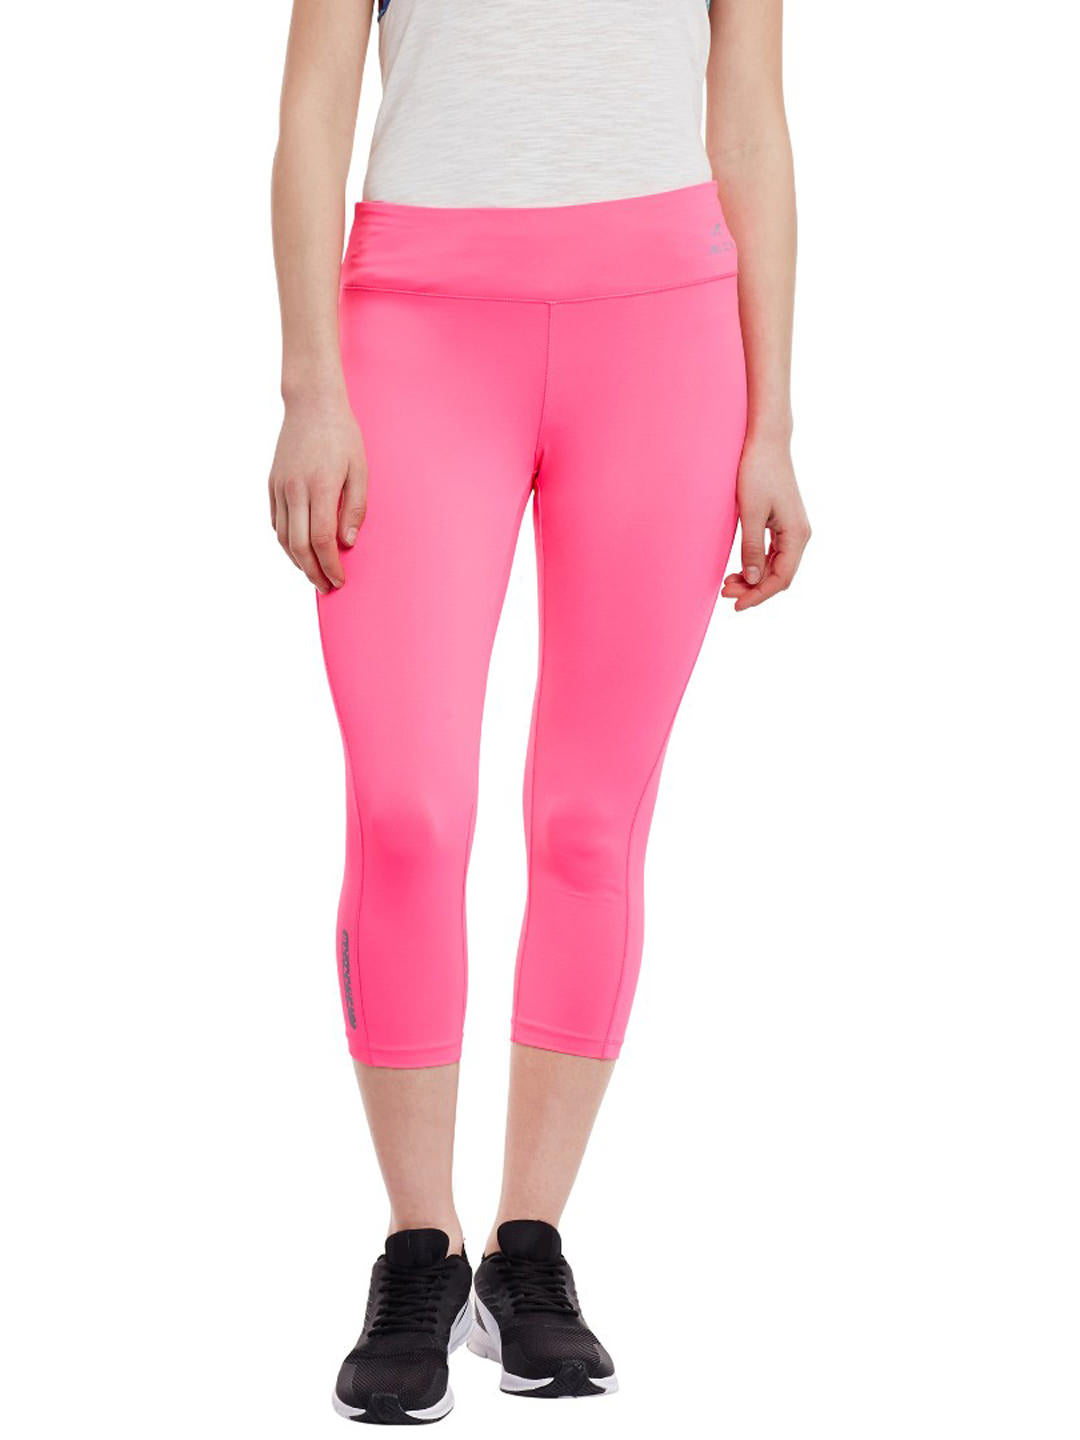 Alcis Women Solid Pink Tights ALWPA151453-XS